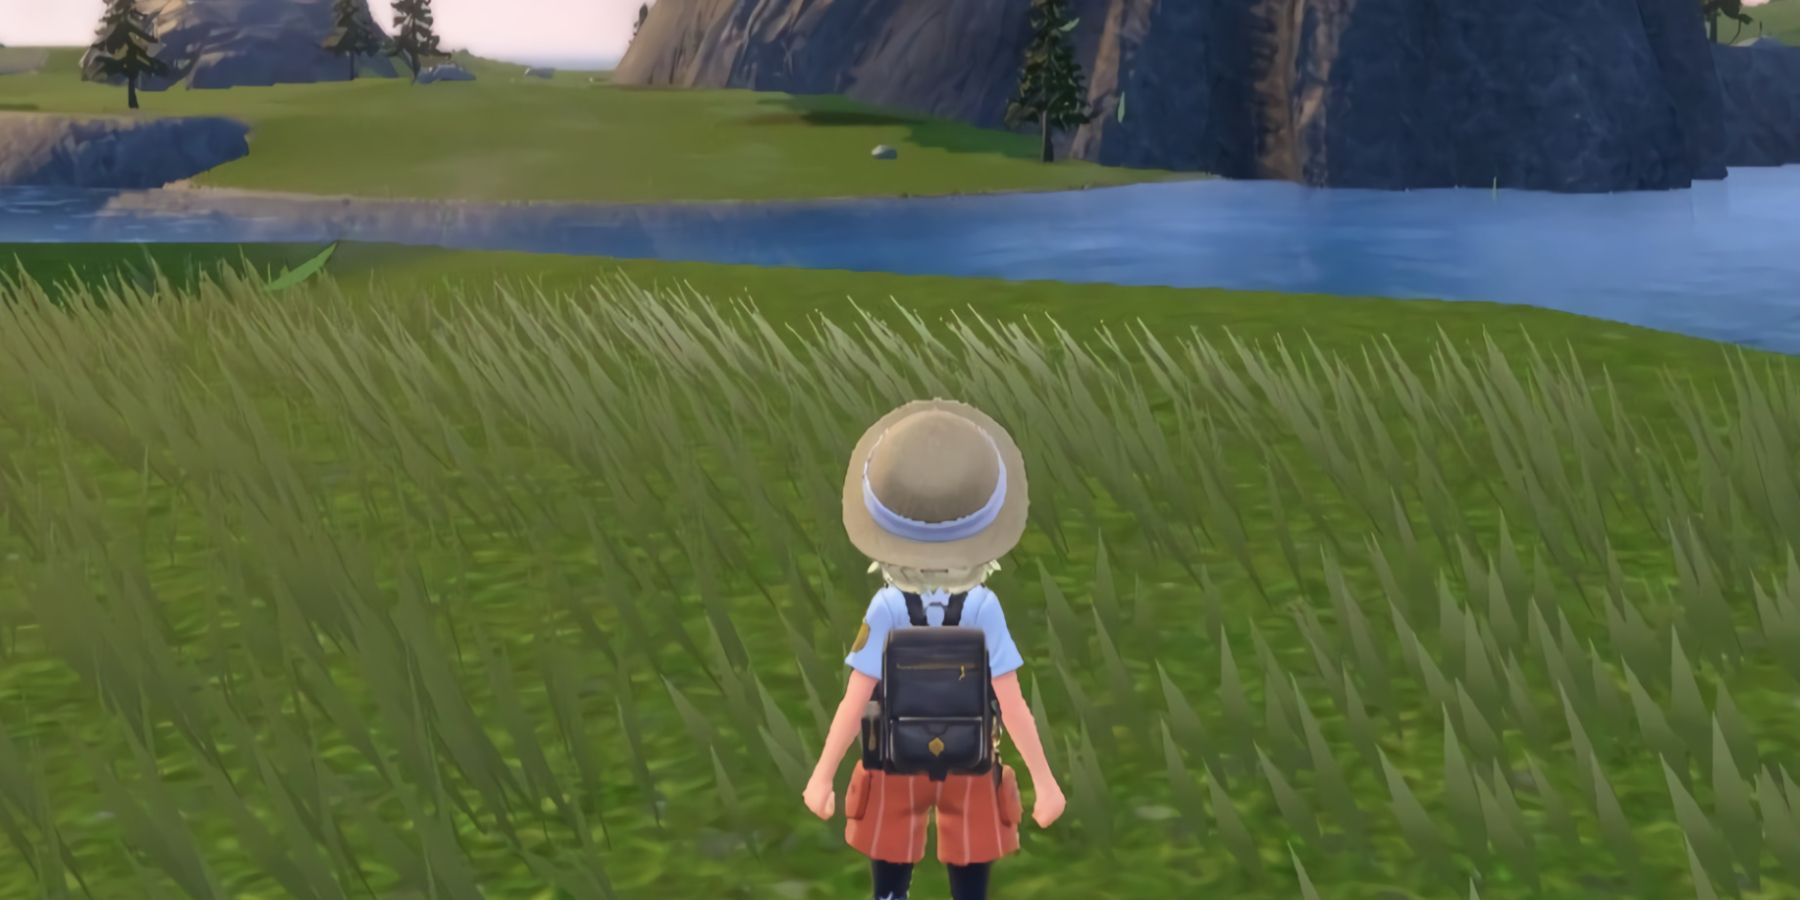 A Pokémon trainer in Pokémon Scarlet and Violet standing next to a river; the area is noticeably devoid of any Pokémon or NPCs.